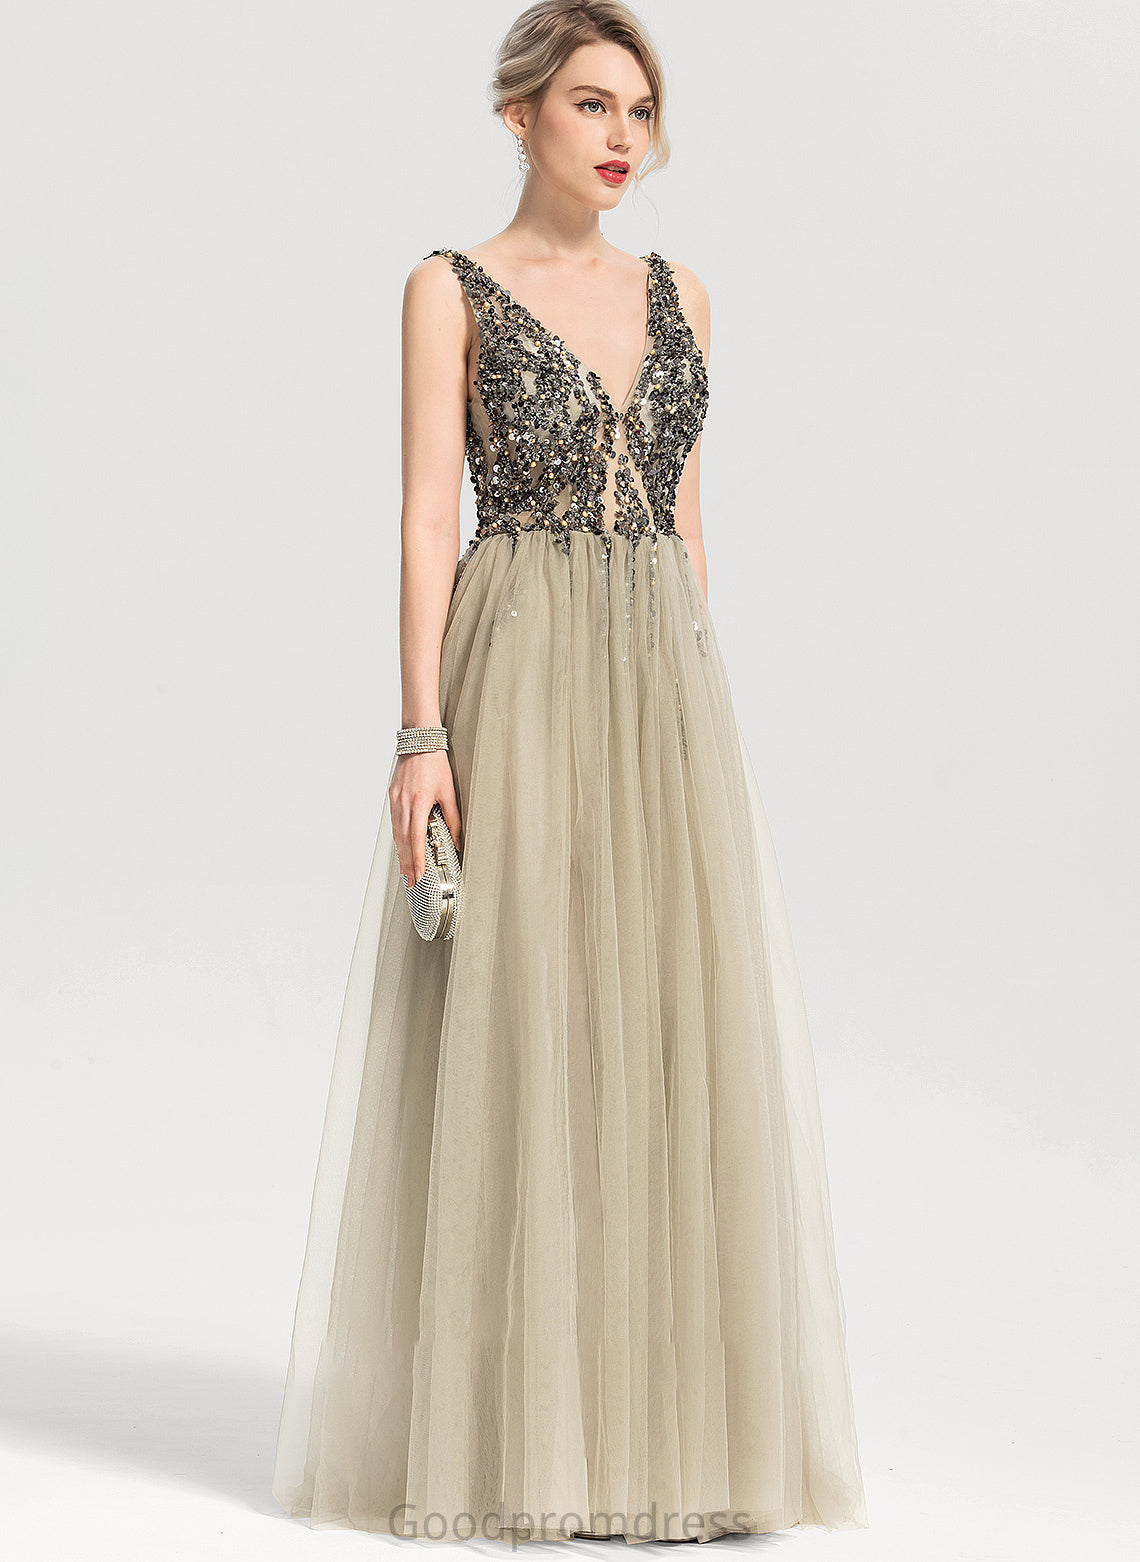 Floor-Length V-neck Prom Dresses A-Line With Xiomara Beading Tulle Front Sequins Split